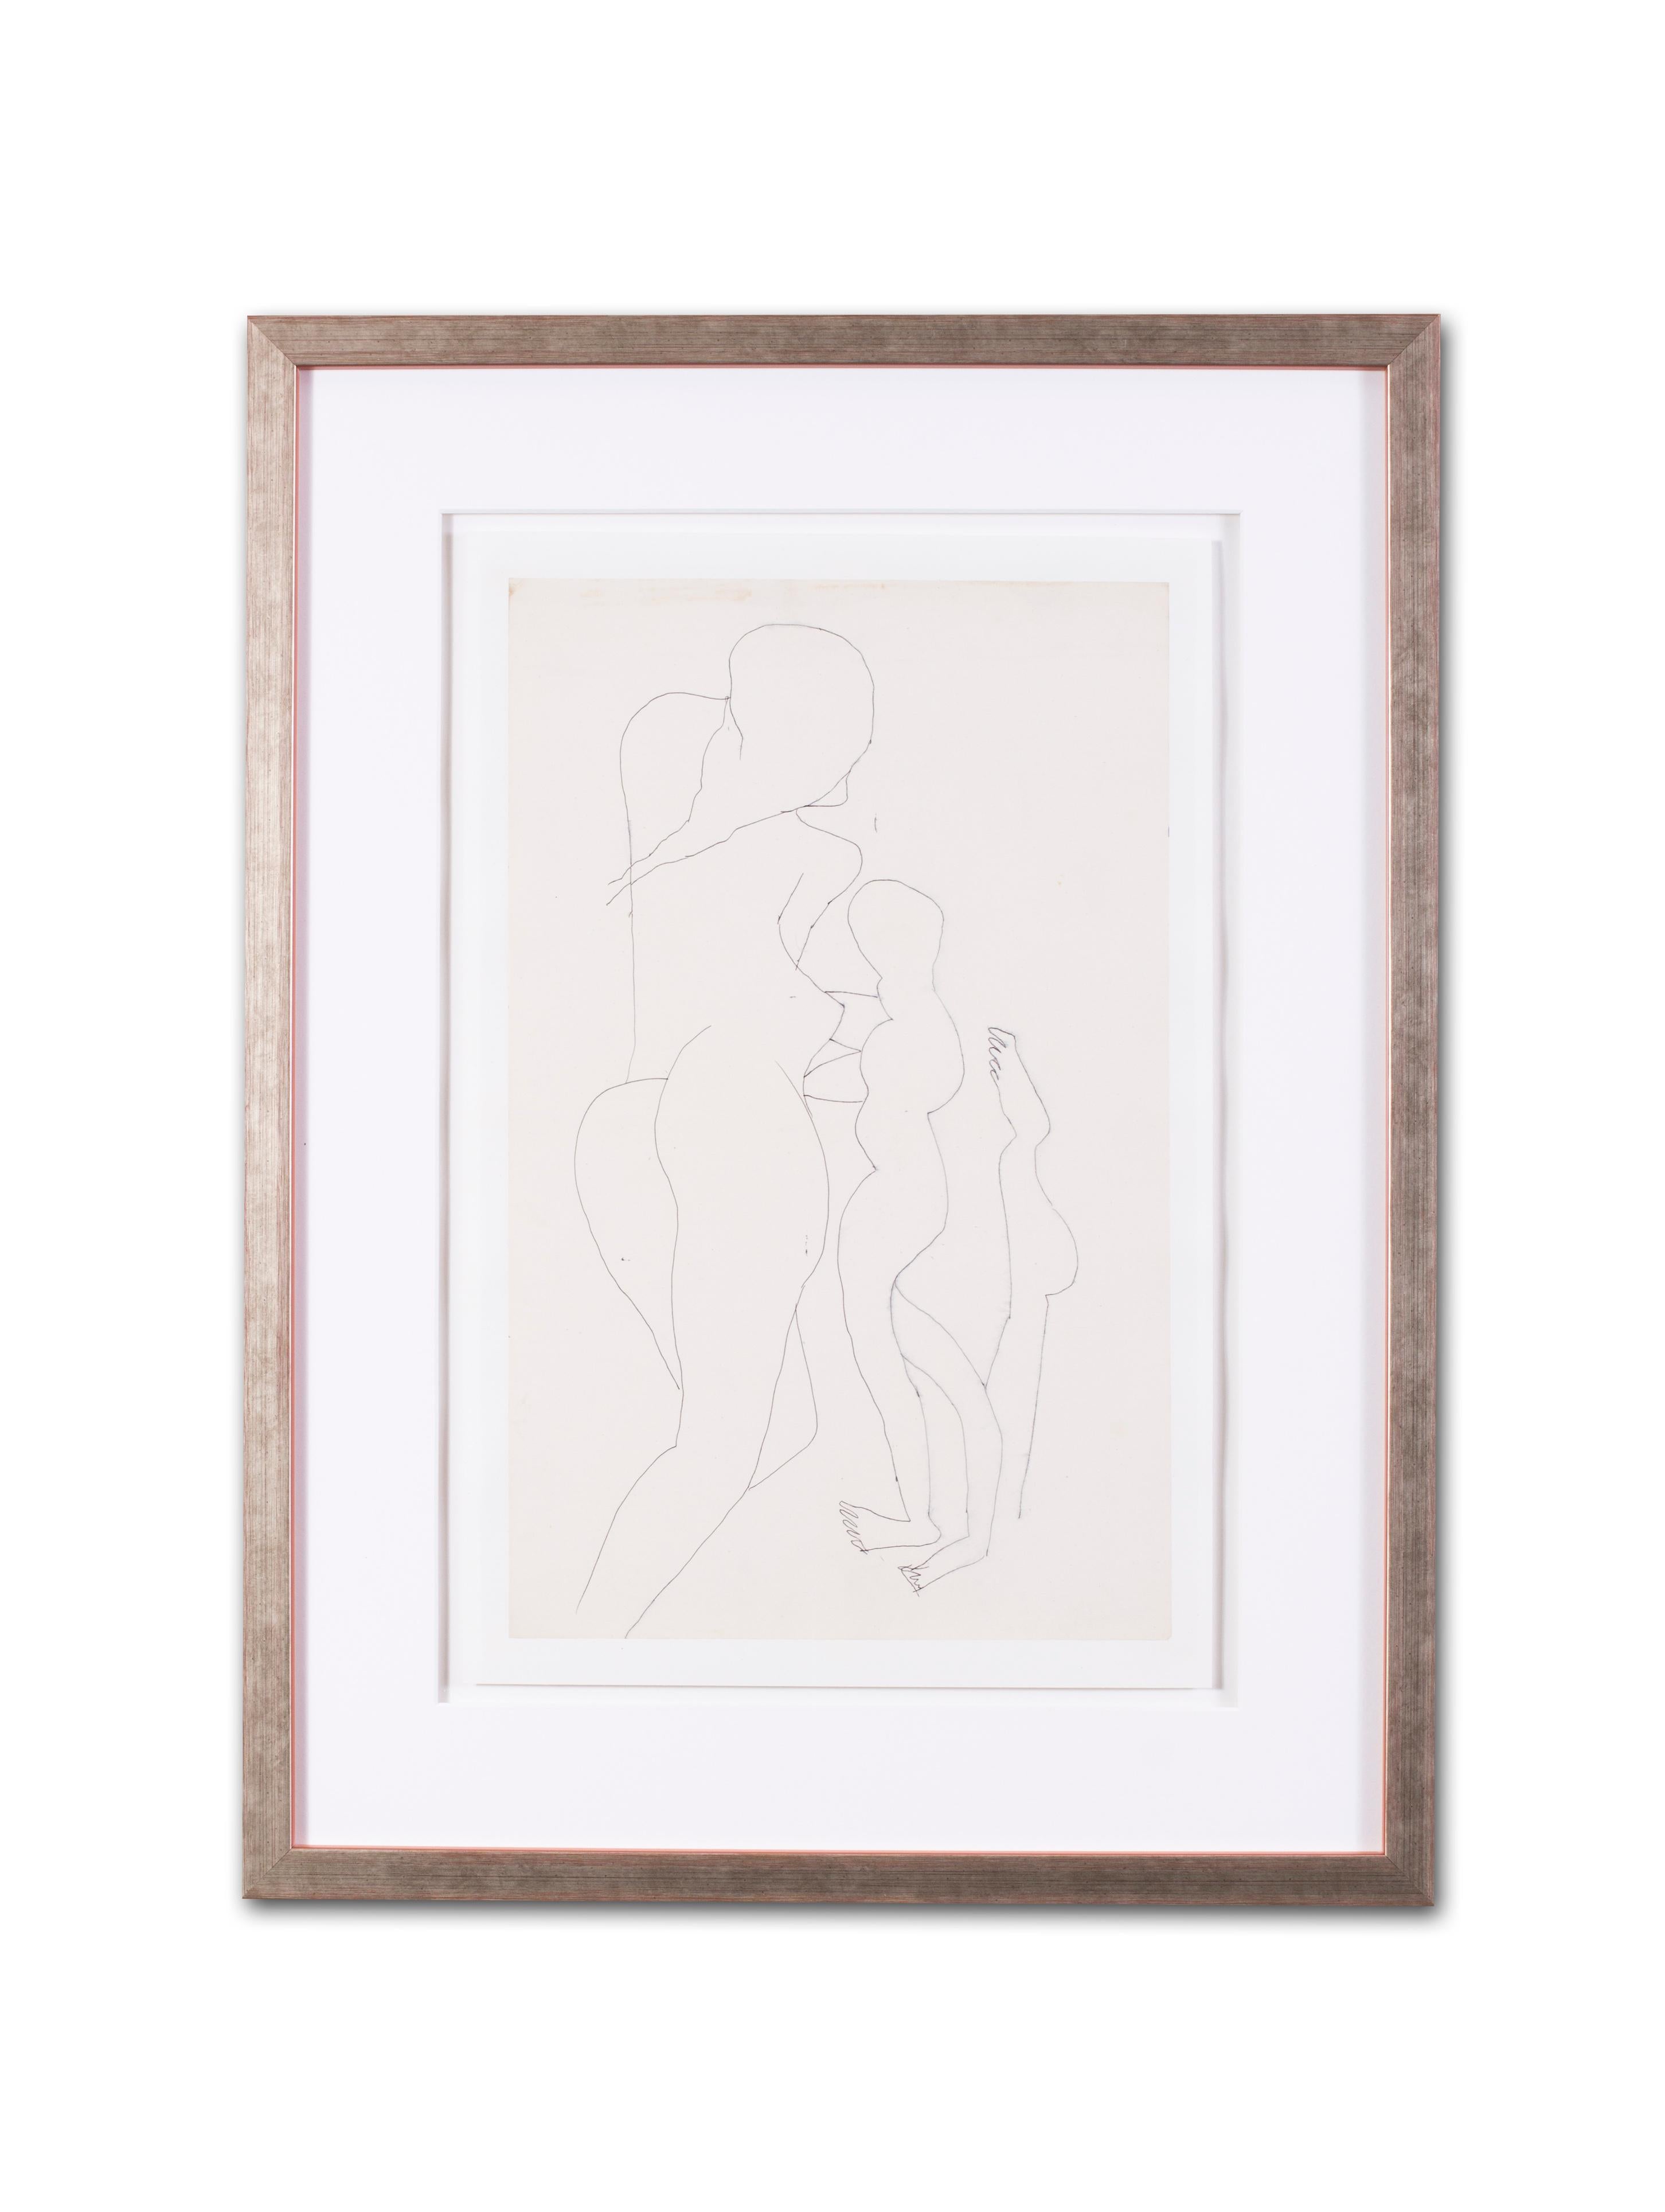 FRANCIS NEWTON SOUZA Figurative Art - A 20th Century abstract drawing of female nudes by Indian artist F. N. Souza